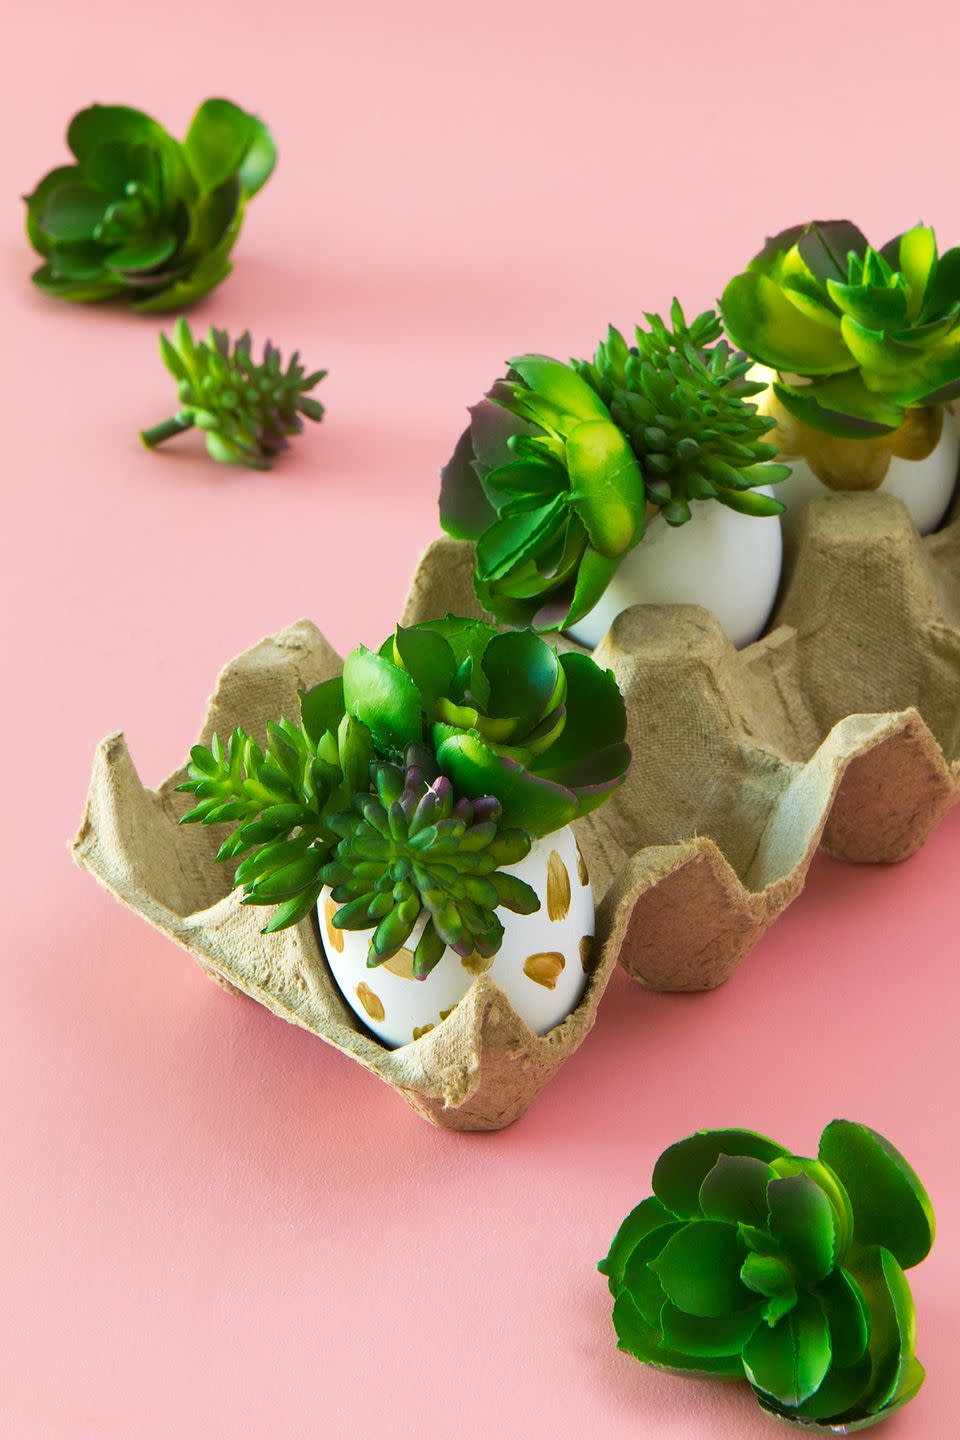 <p>You don't need a green thumb to make these little planters. Succulent eggs are <em>perfect</em> for garden easter egg hunts, because they'll blend right in!</p><p><strong><strong>Get the tutorial at <a href="https://sarahhearts.com/diy-faux-succulent-easter-egg-planters/" rel="nofollow noopener" target="_blank" data-ylk="slk:Sarah Hearts" class="link ">Sarah Hearts</a>.</strong></strong></p>